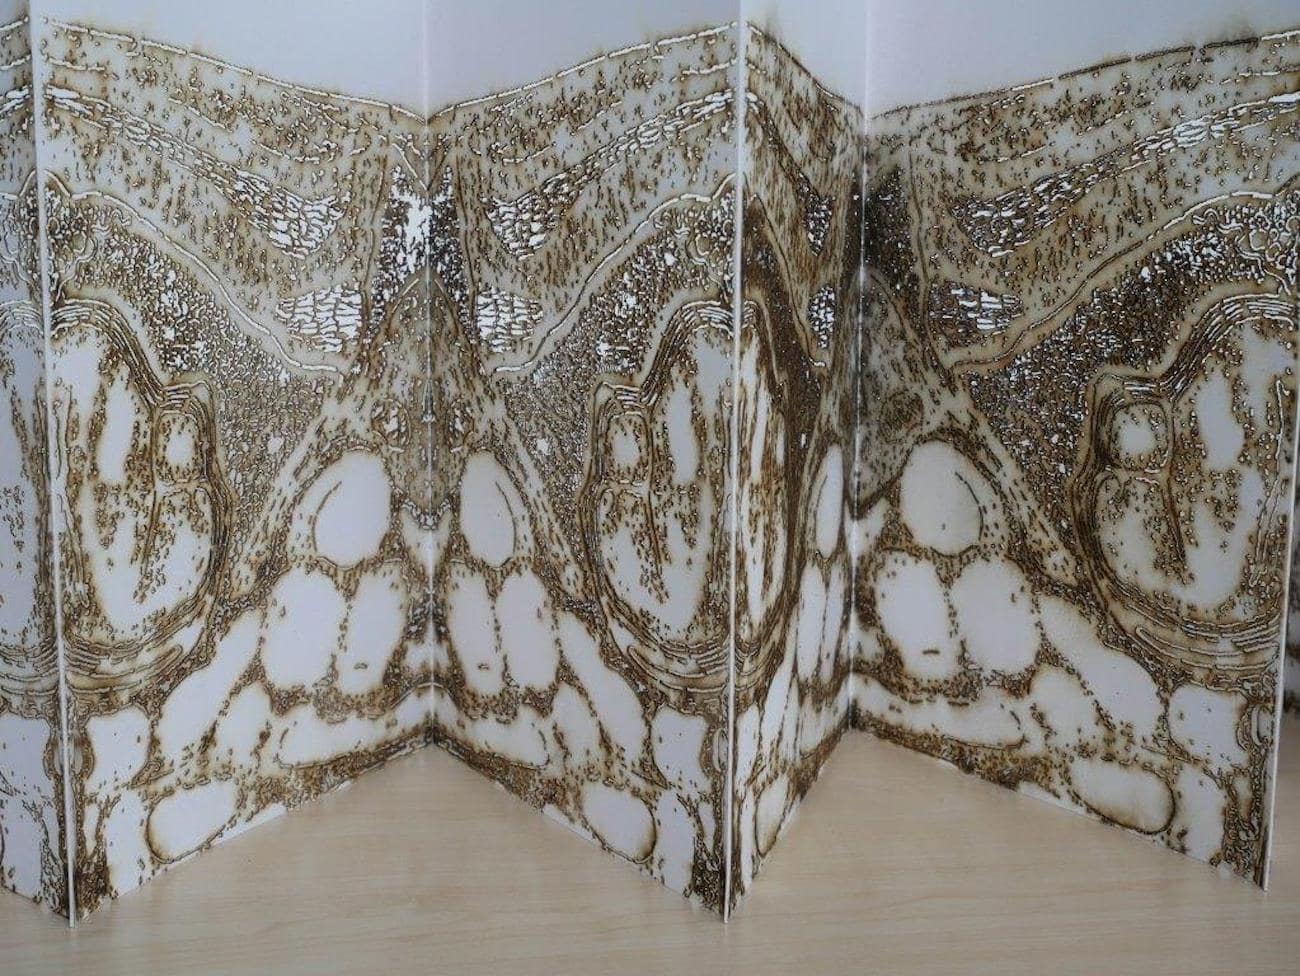 Extended concertina pages of a book featuring laser cut images of a human brain.